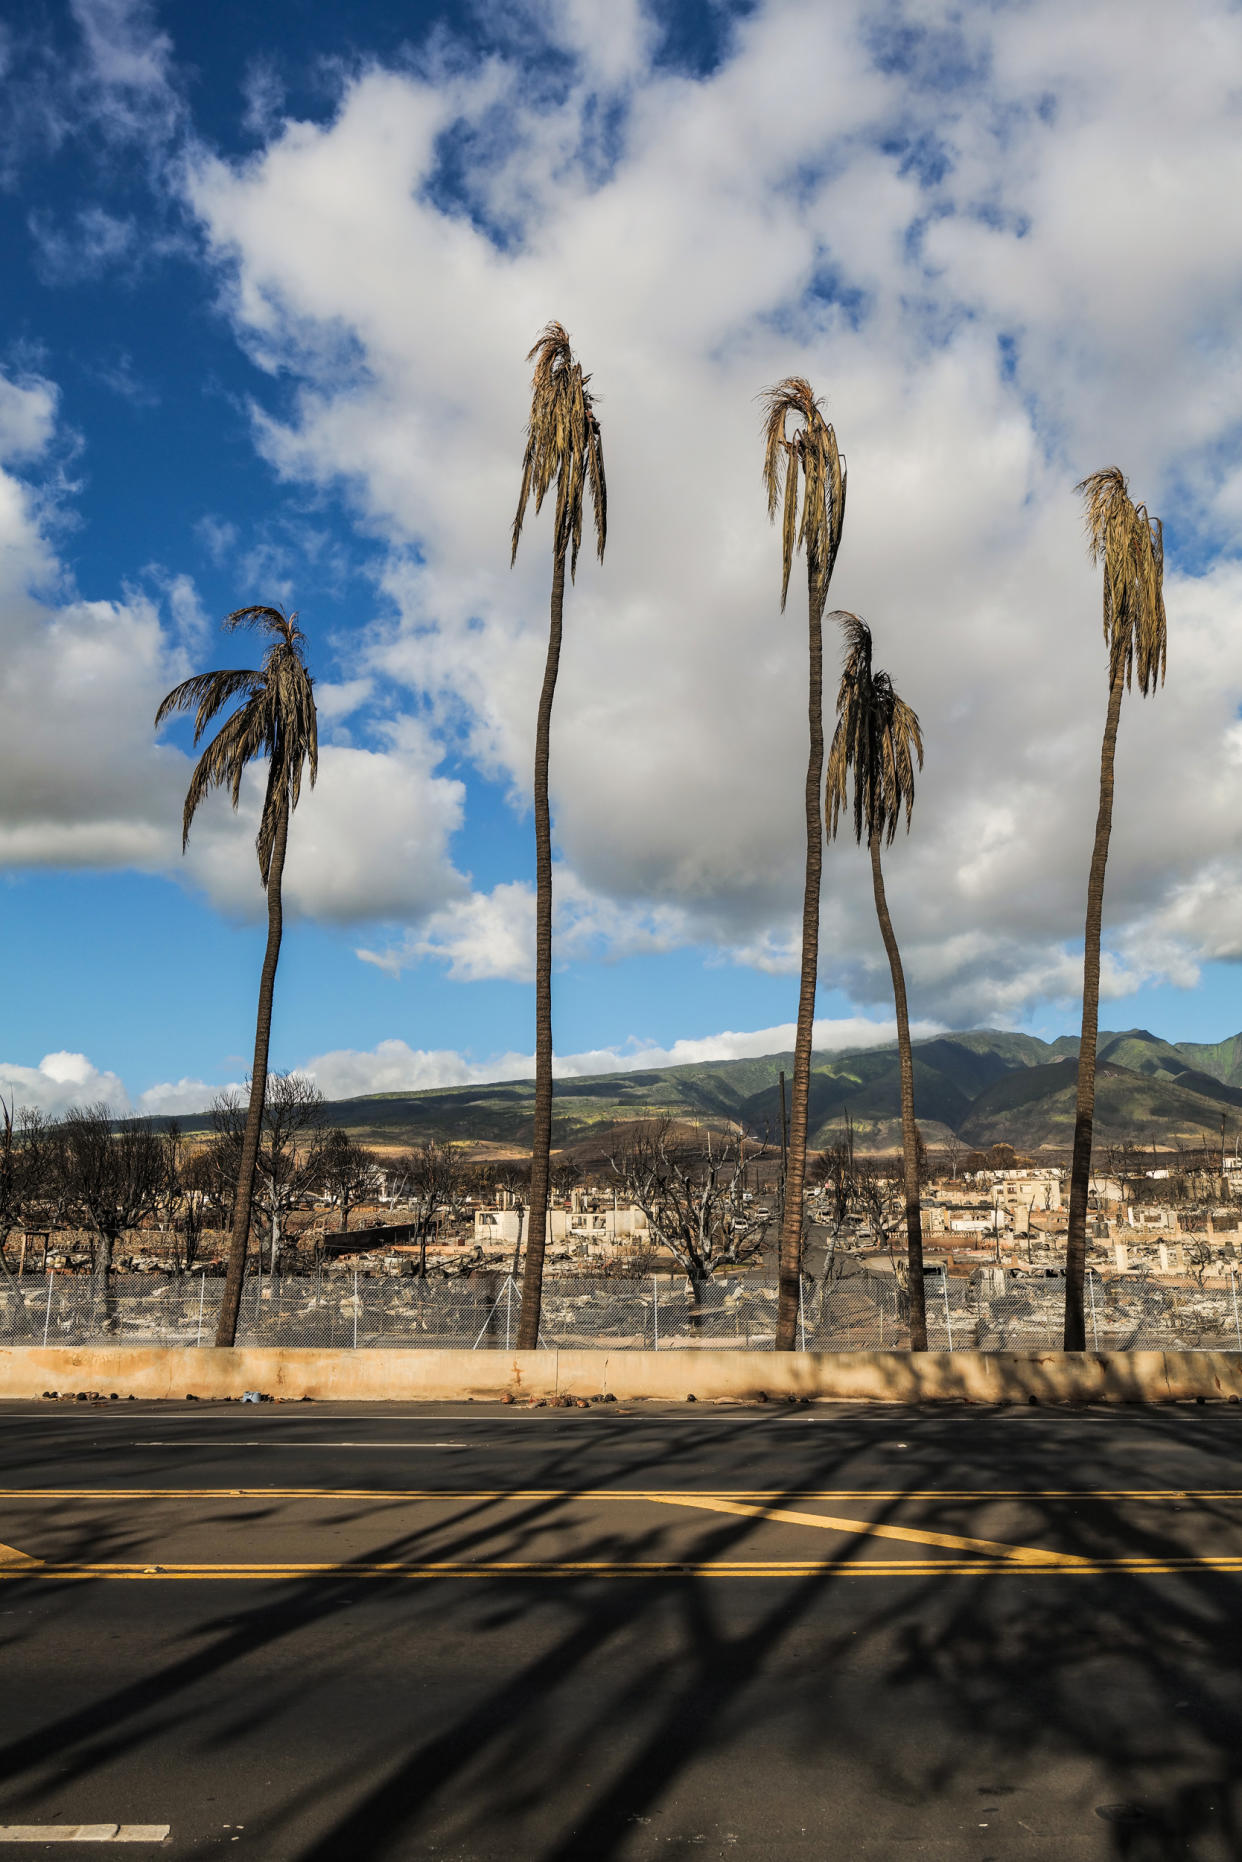 Burnt coconut trees and homes in Lahaina town, Maui, Hawaii on Aug. 16, 2023. (Josiah Patterson for NBC News)